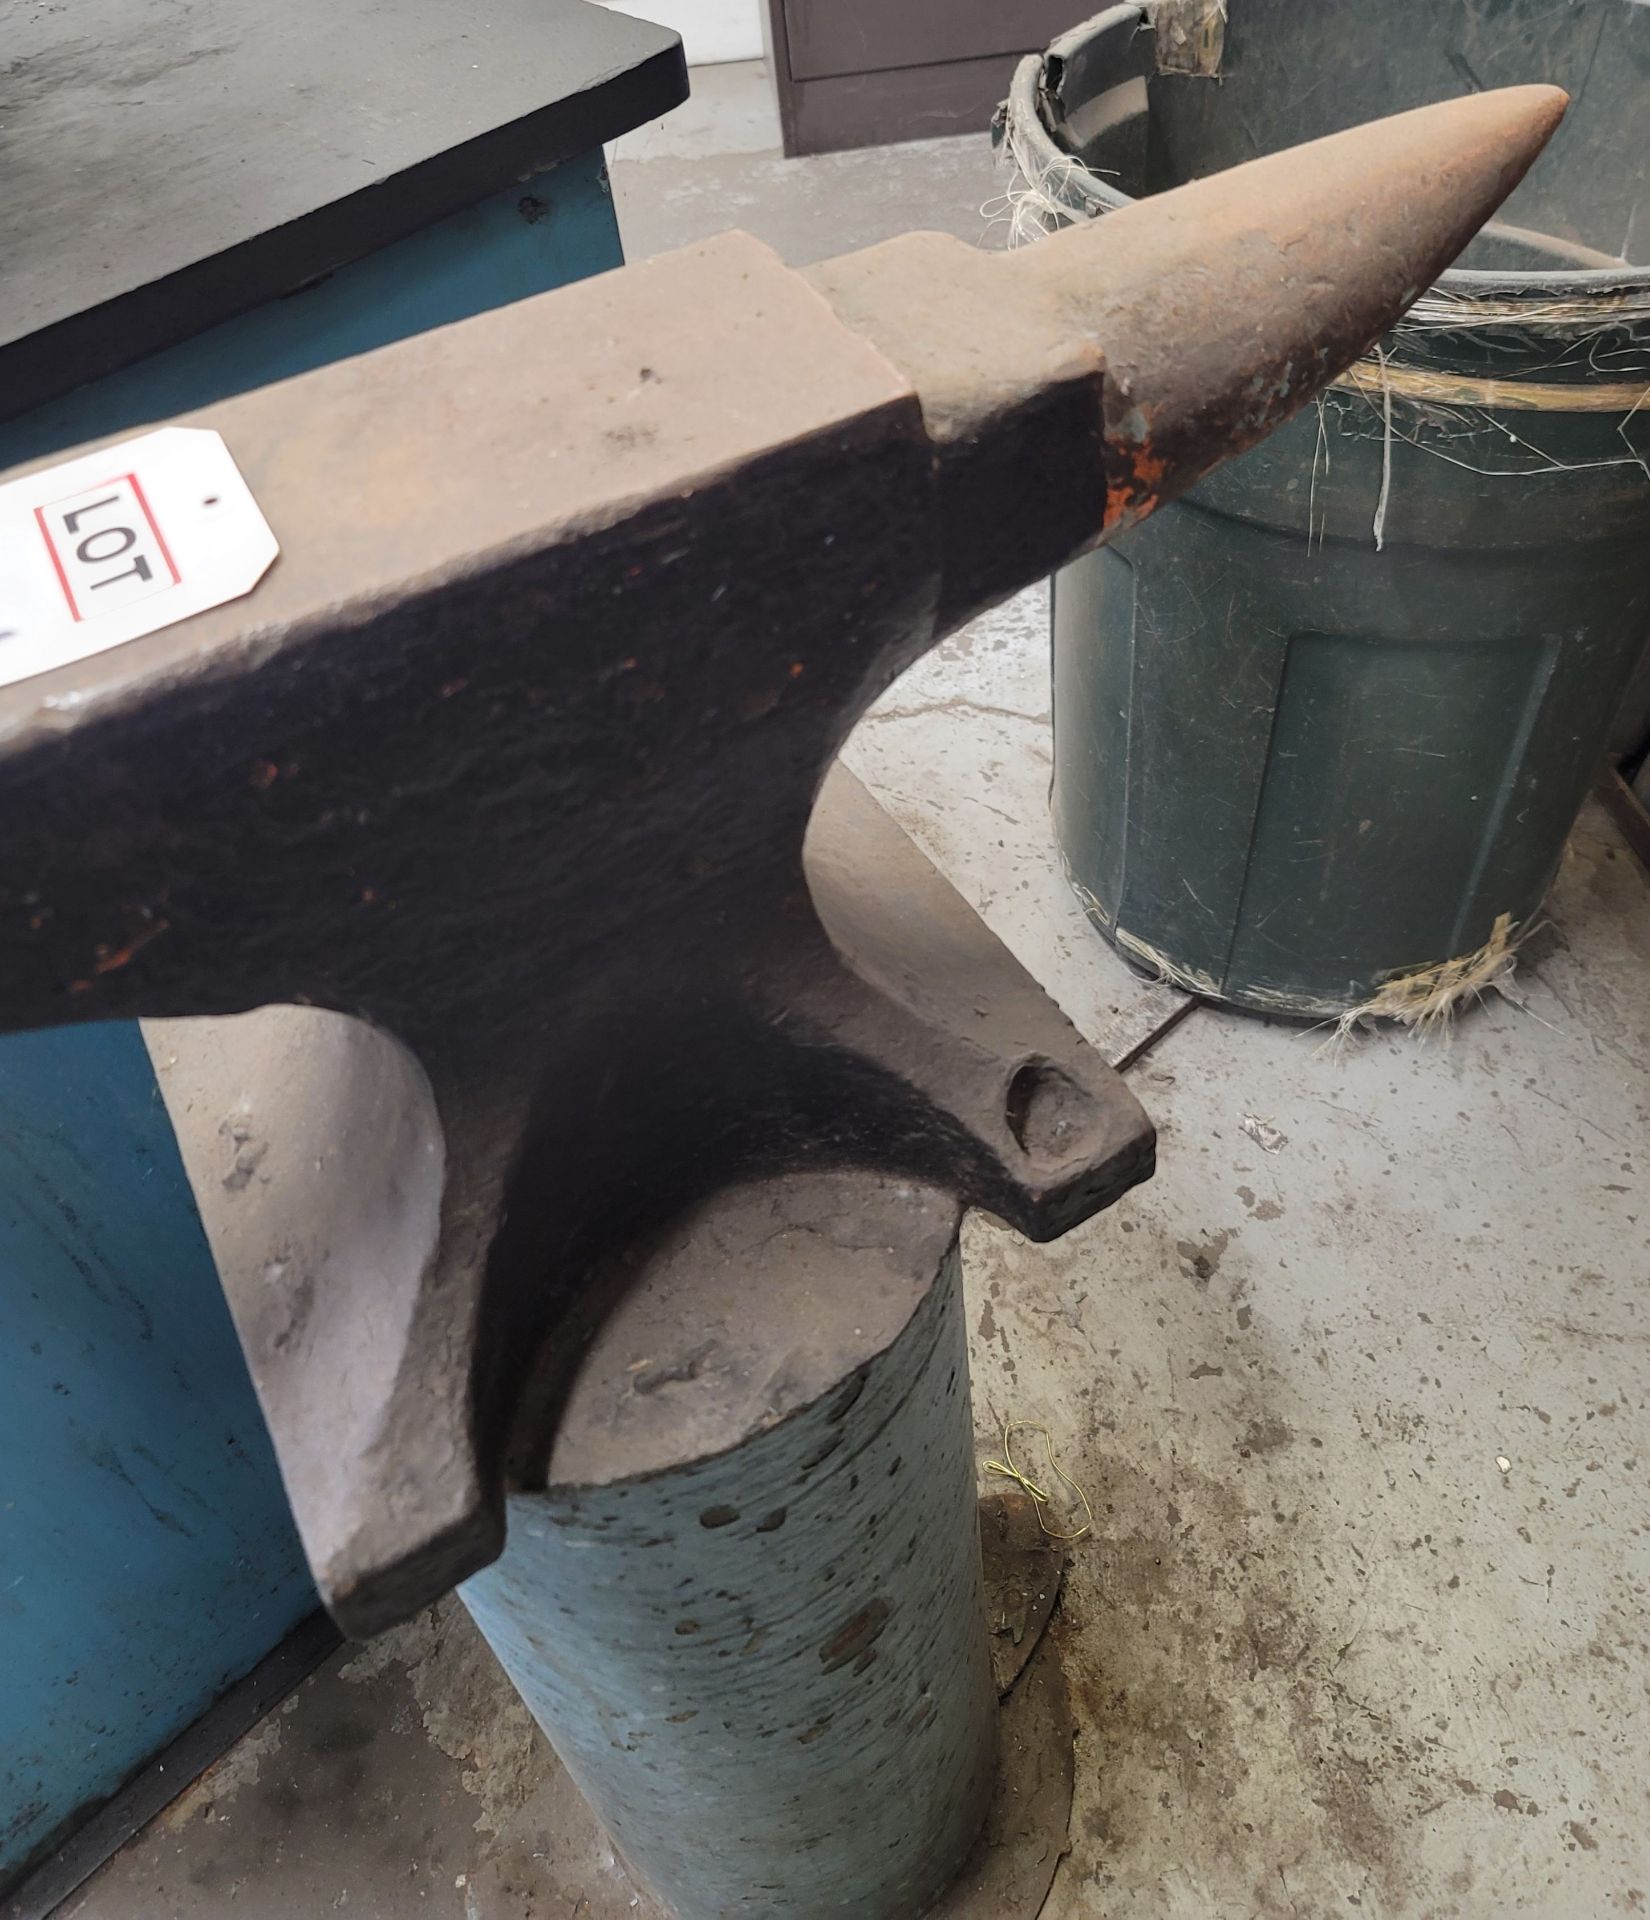 ANVIL, 28-1/2" X 4-1/4" X 11-1/2" HT, UNKNOWN BRAND - Image 3 of 4